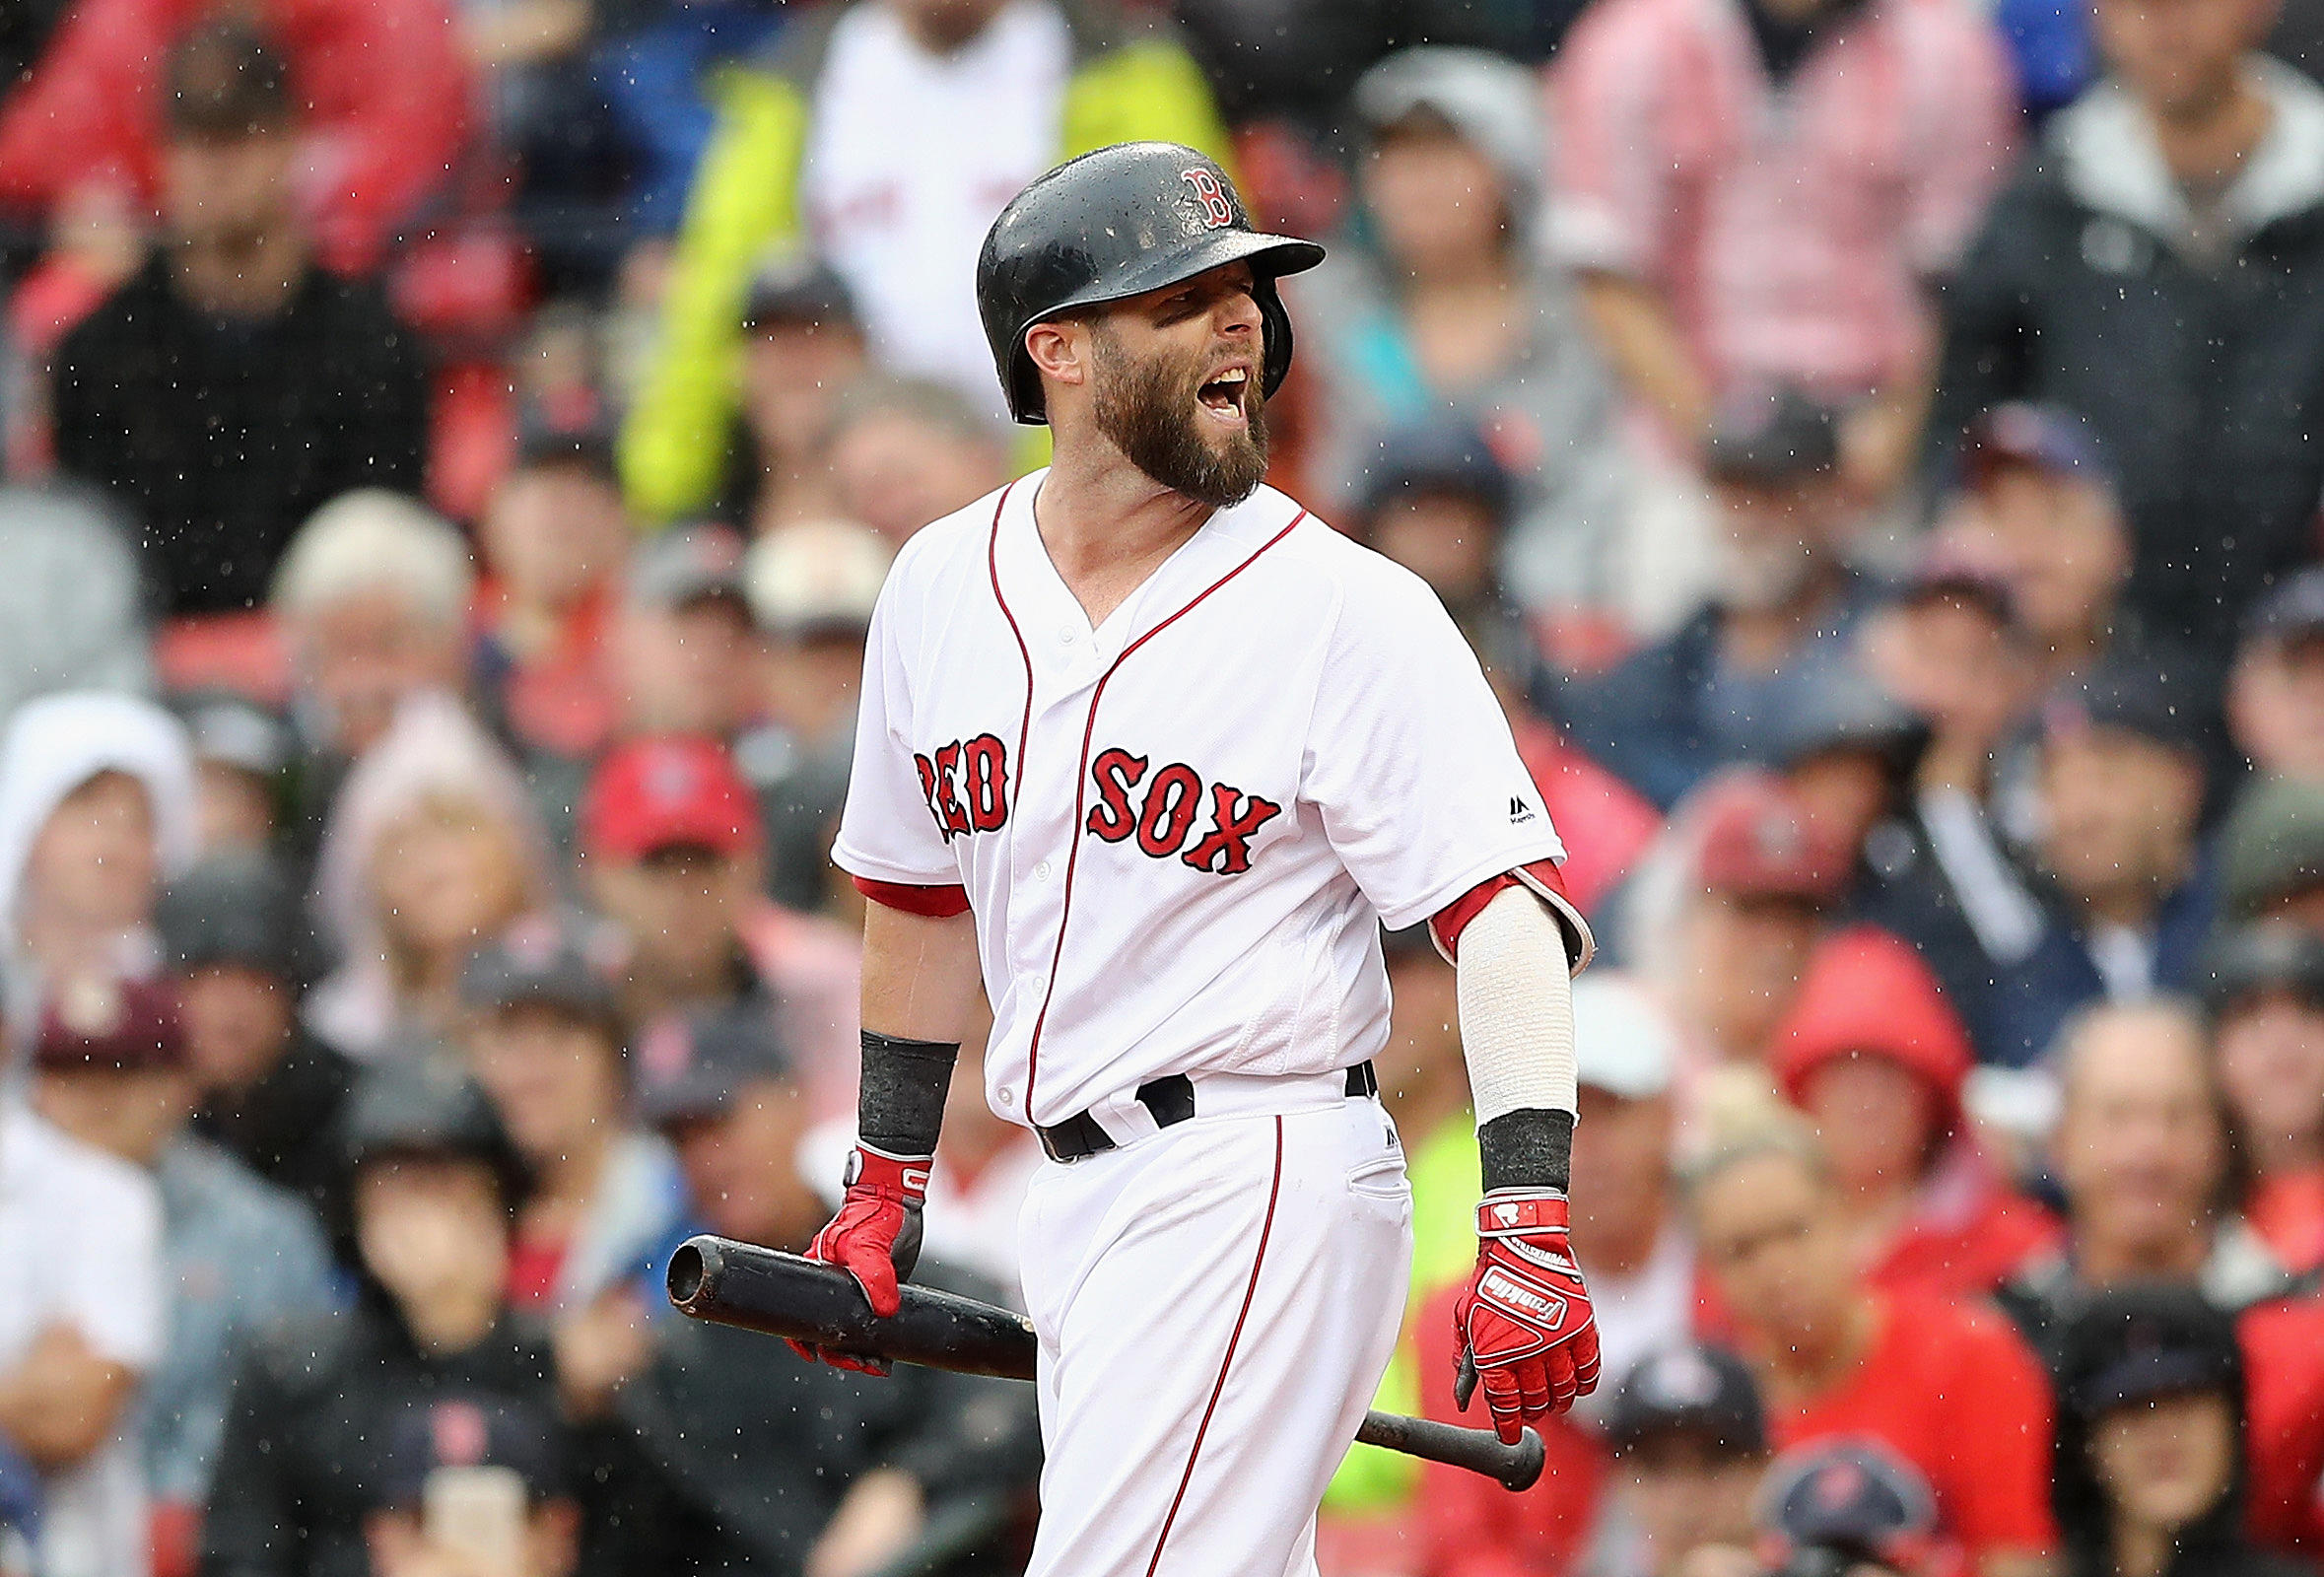 Where is Dustin Pedroia, former MVP who Red Sox are still paying